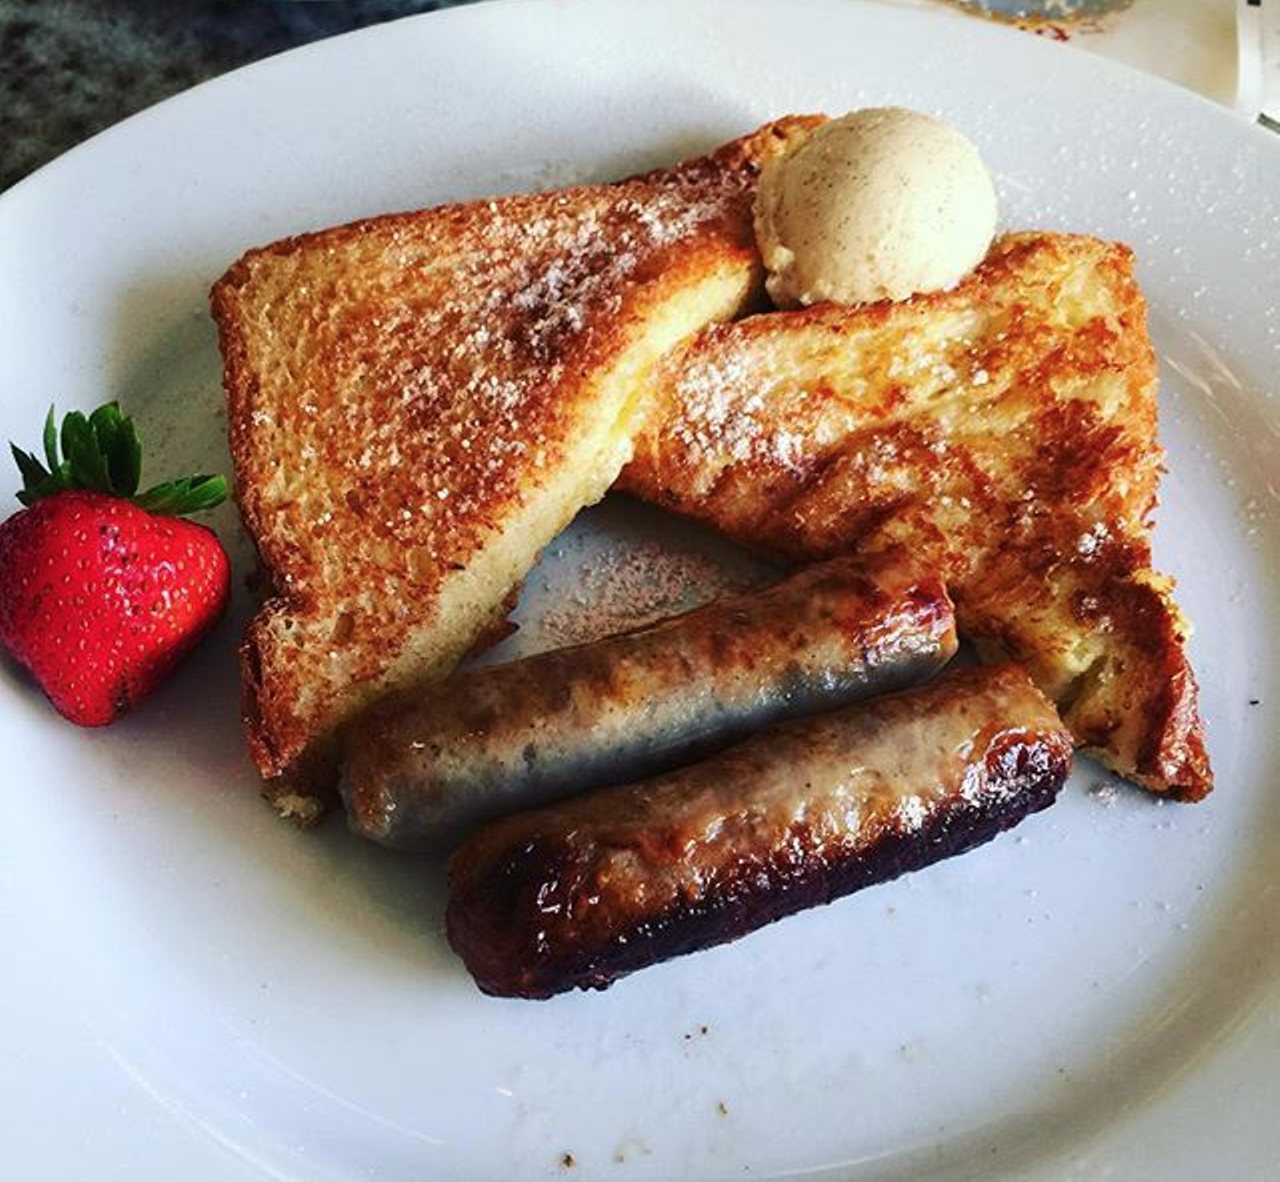 Vanilla-laced french toast at the Grand Floridian Cafe.
Photo via @jennayy1024